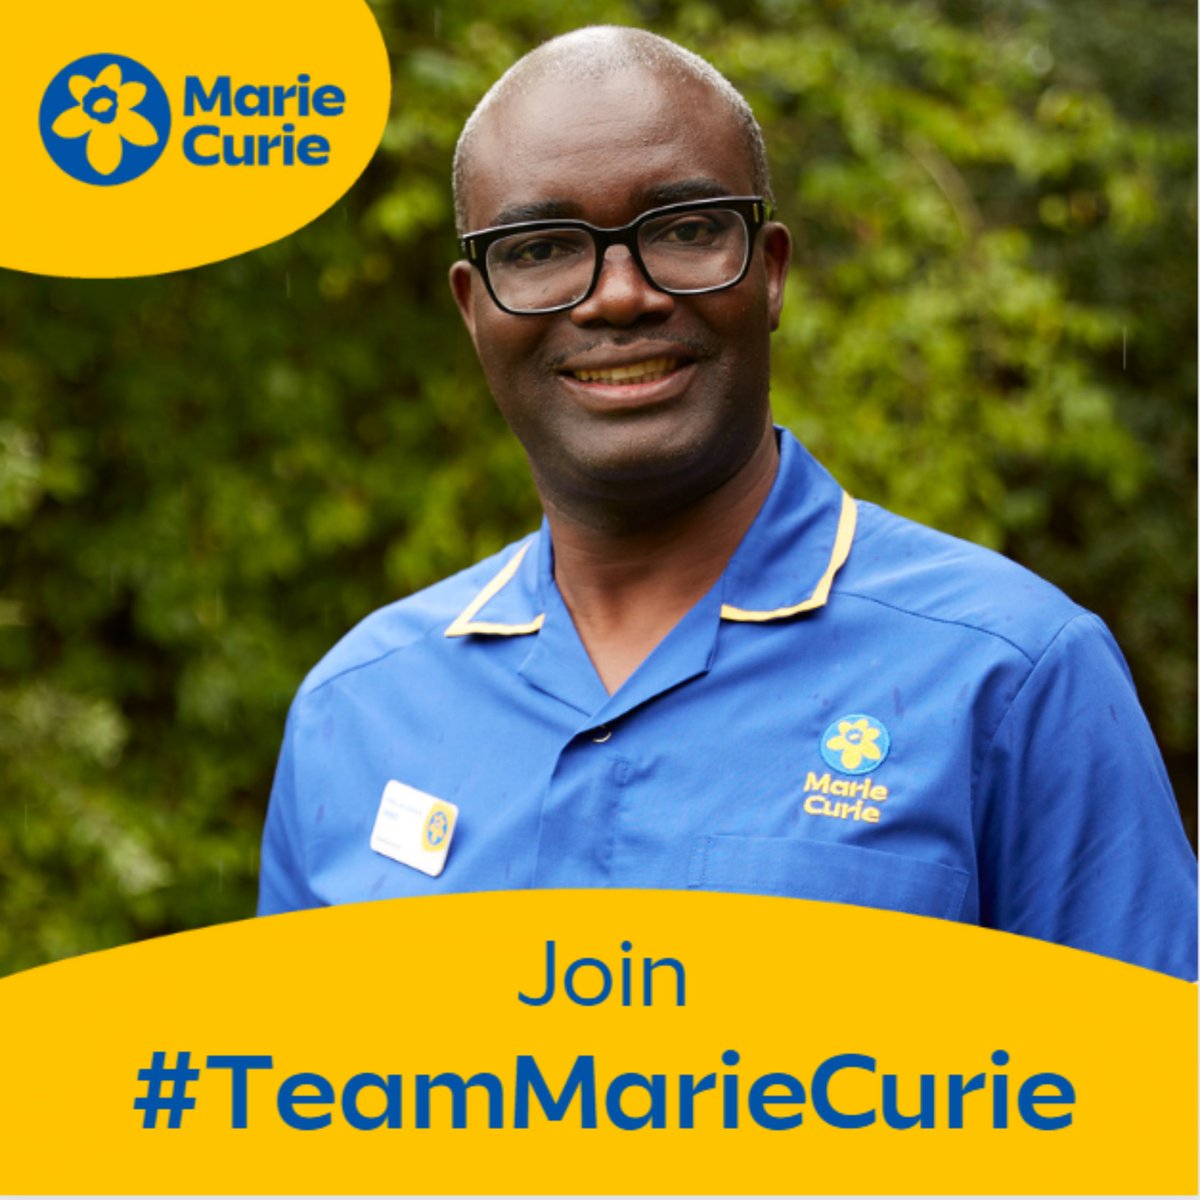 #CharityTuesday 1 in 4 people die without the vital end of life care they need. @Mariecurieuk can change that. Wonderful supporters like you mean more people can get the care they need. Join #TeamMarieCurie to help provide expert care in the community. bit.ly/49J5sOE